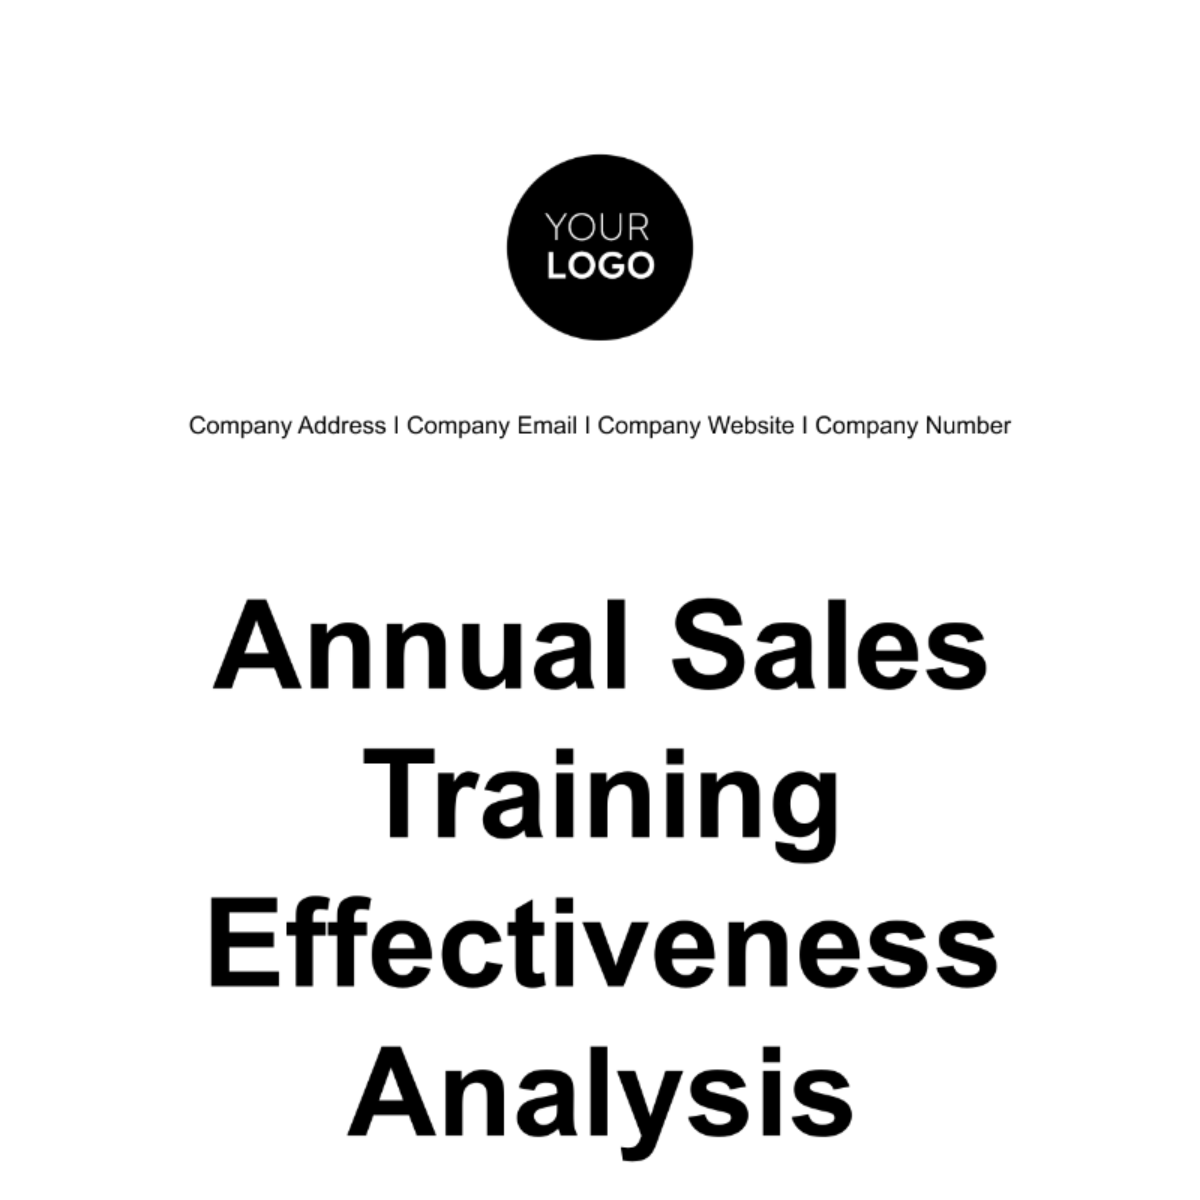 Annual Sales Training Effectiveness Analysis Template